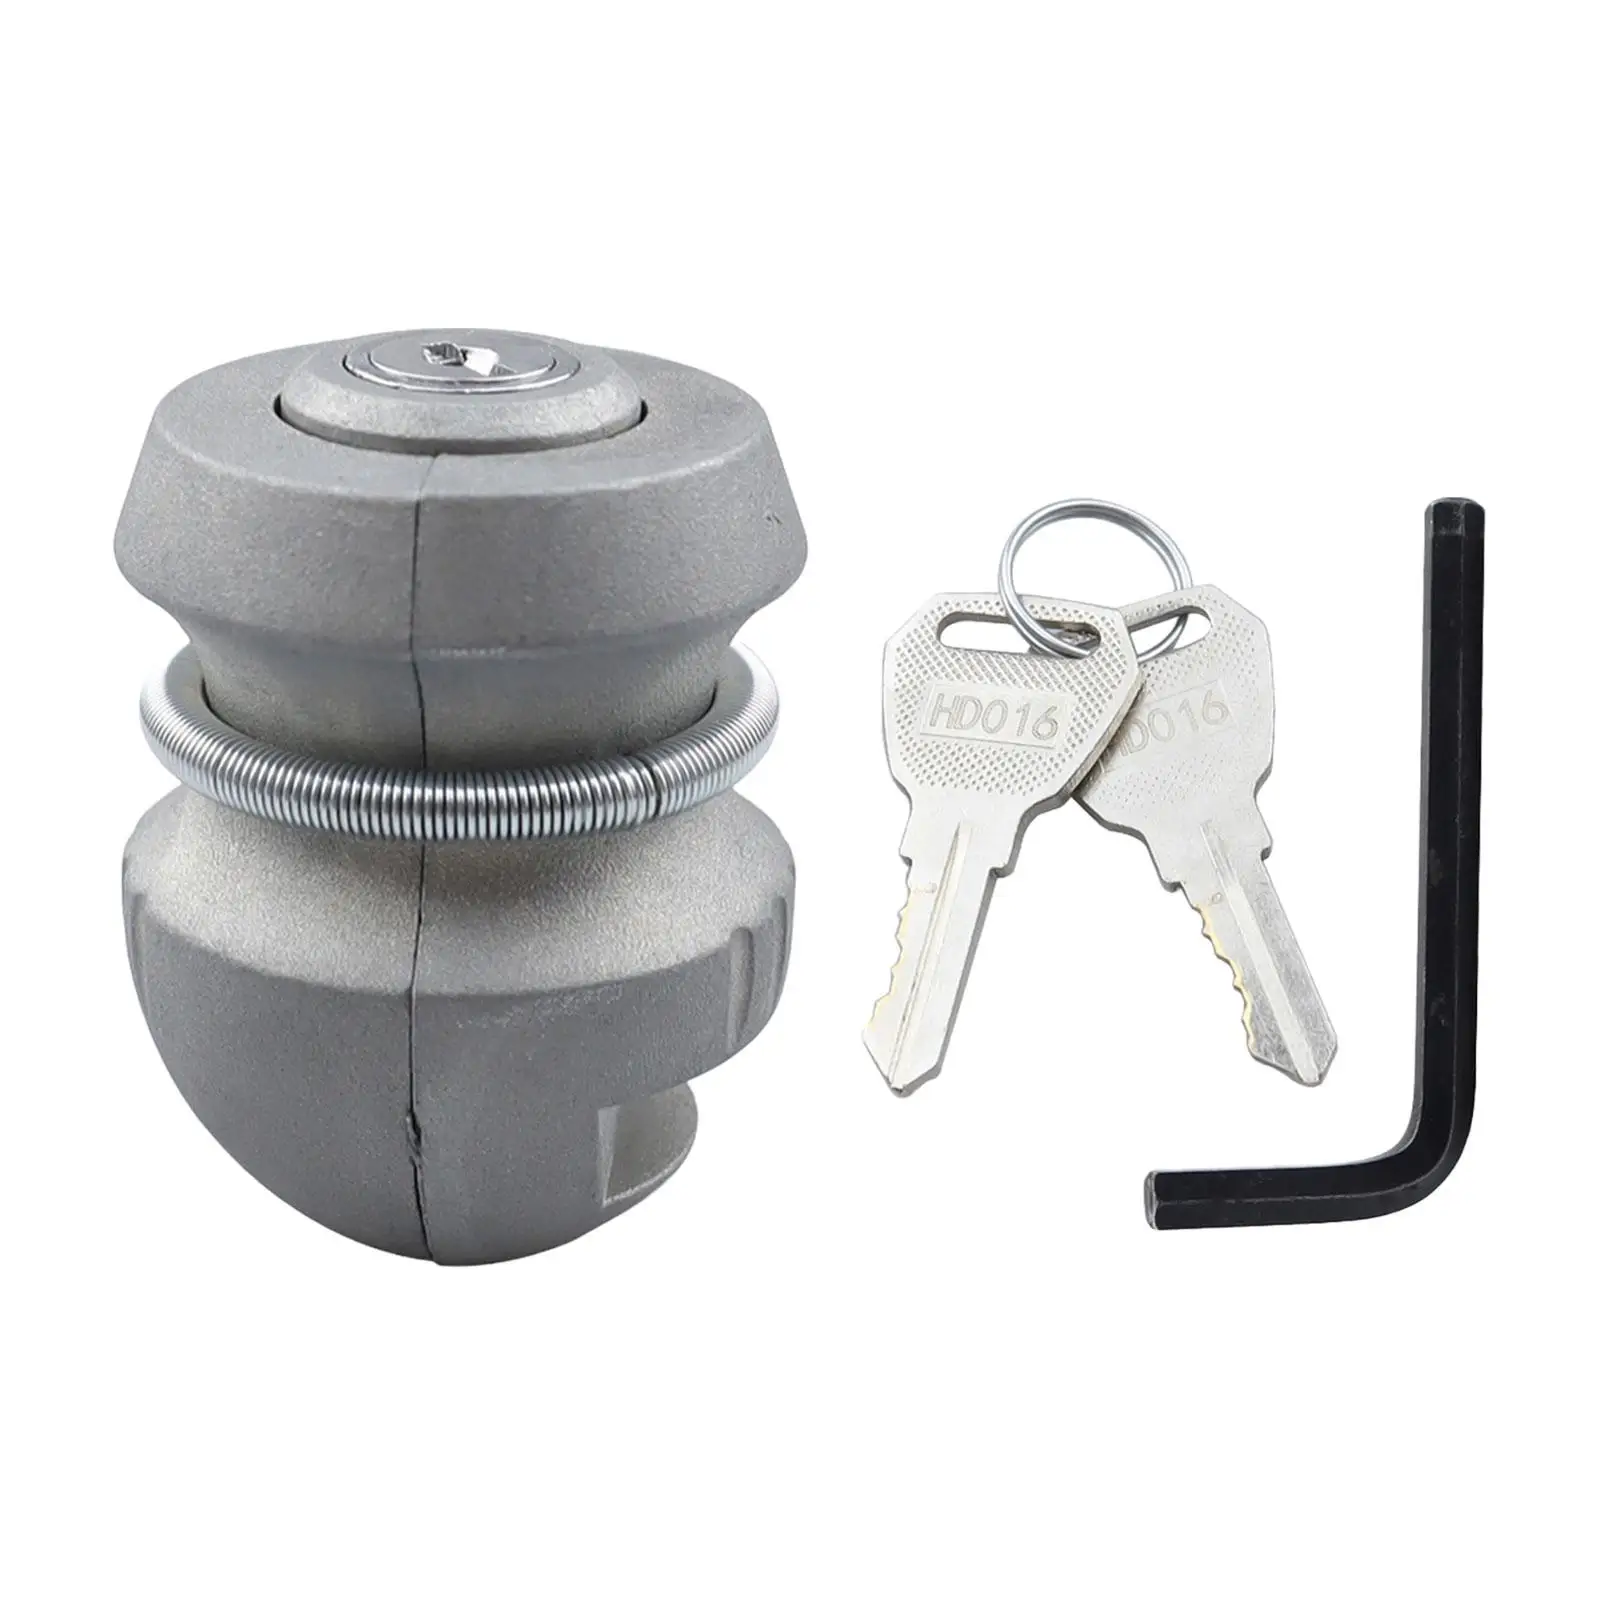 Trailer Part Coupling Lock with 2 Coupling Hitch Keys Metal Trailer Lock Trailer Hitch Replaces for Durable Premium